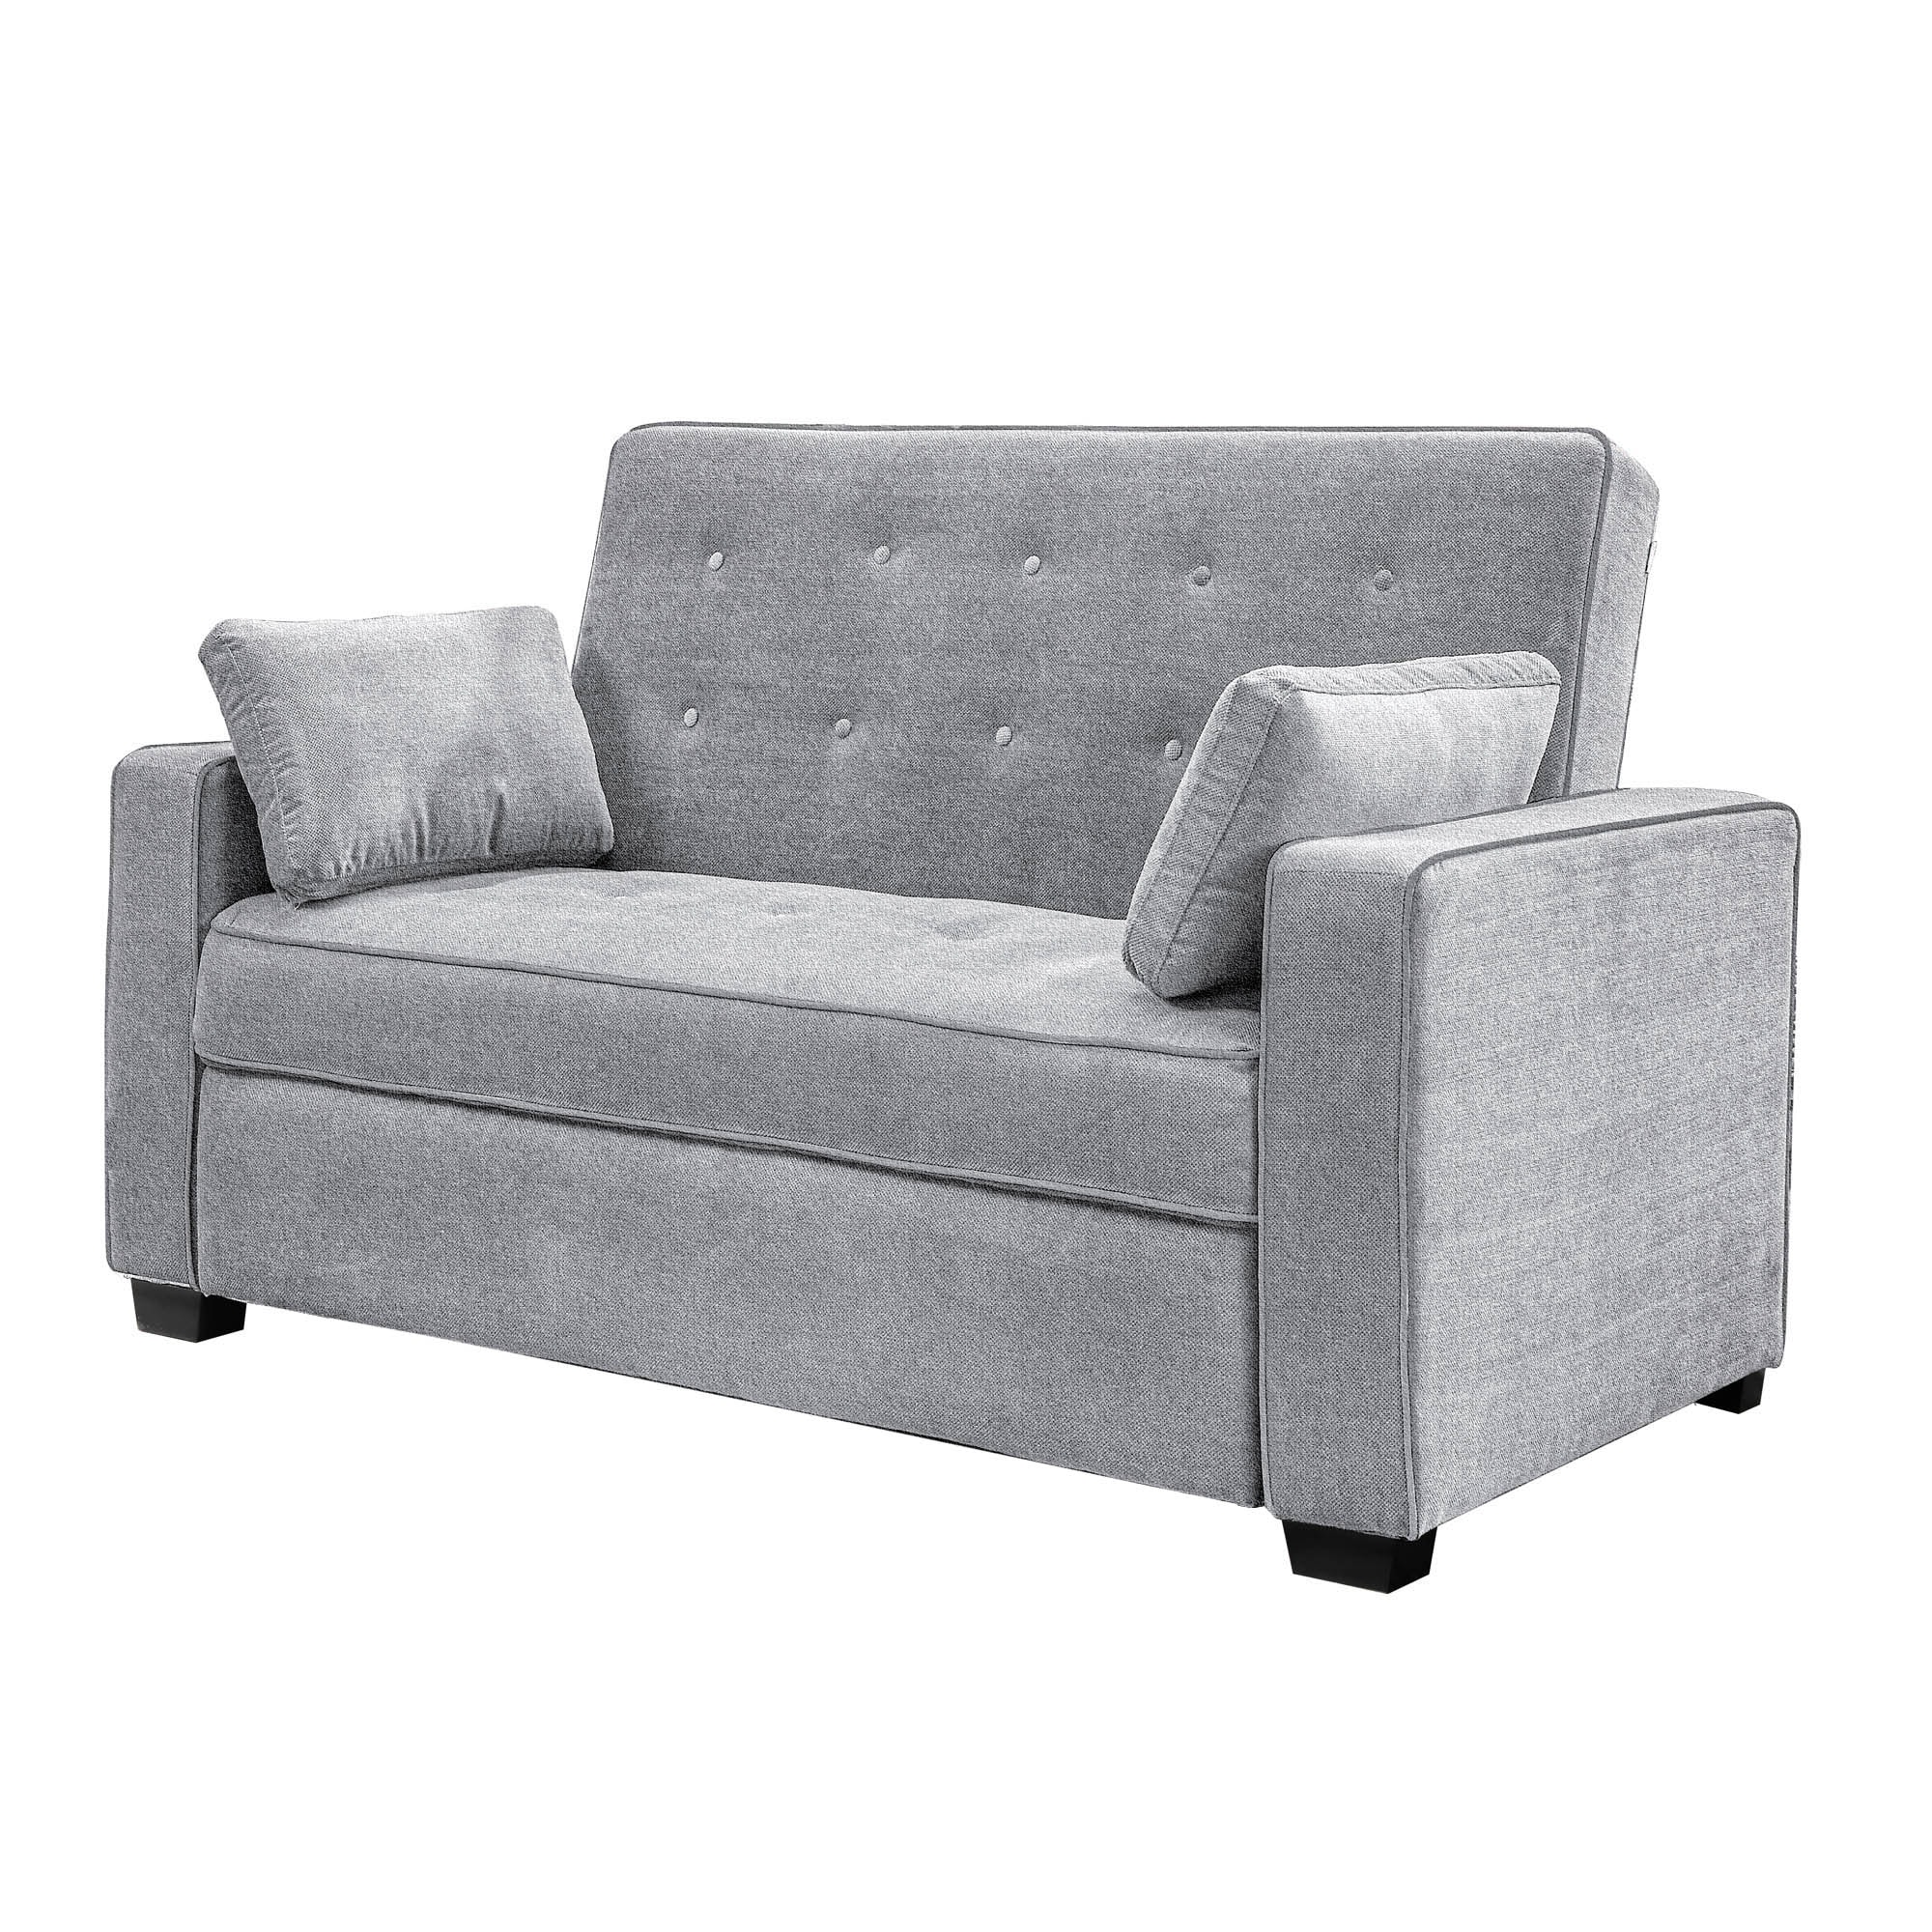 Serta Arya 66.5-in Modern 2-seater the Grey Light at in & Polyester/Blend department Sofa Sofas Couches, Loveseats